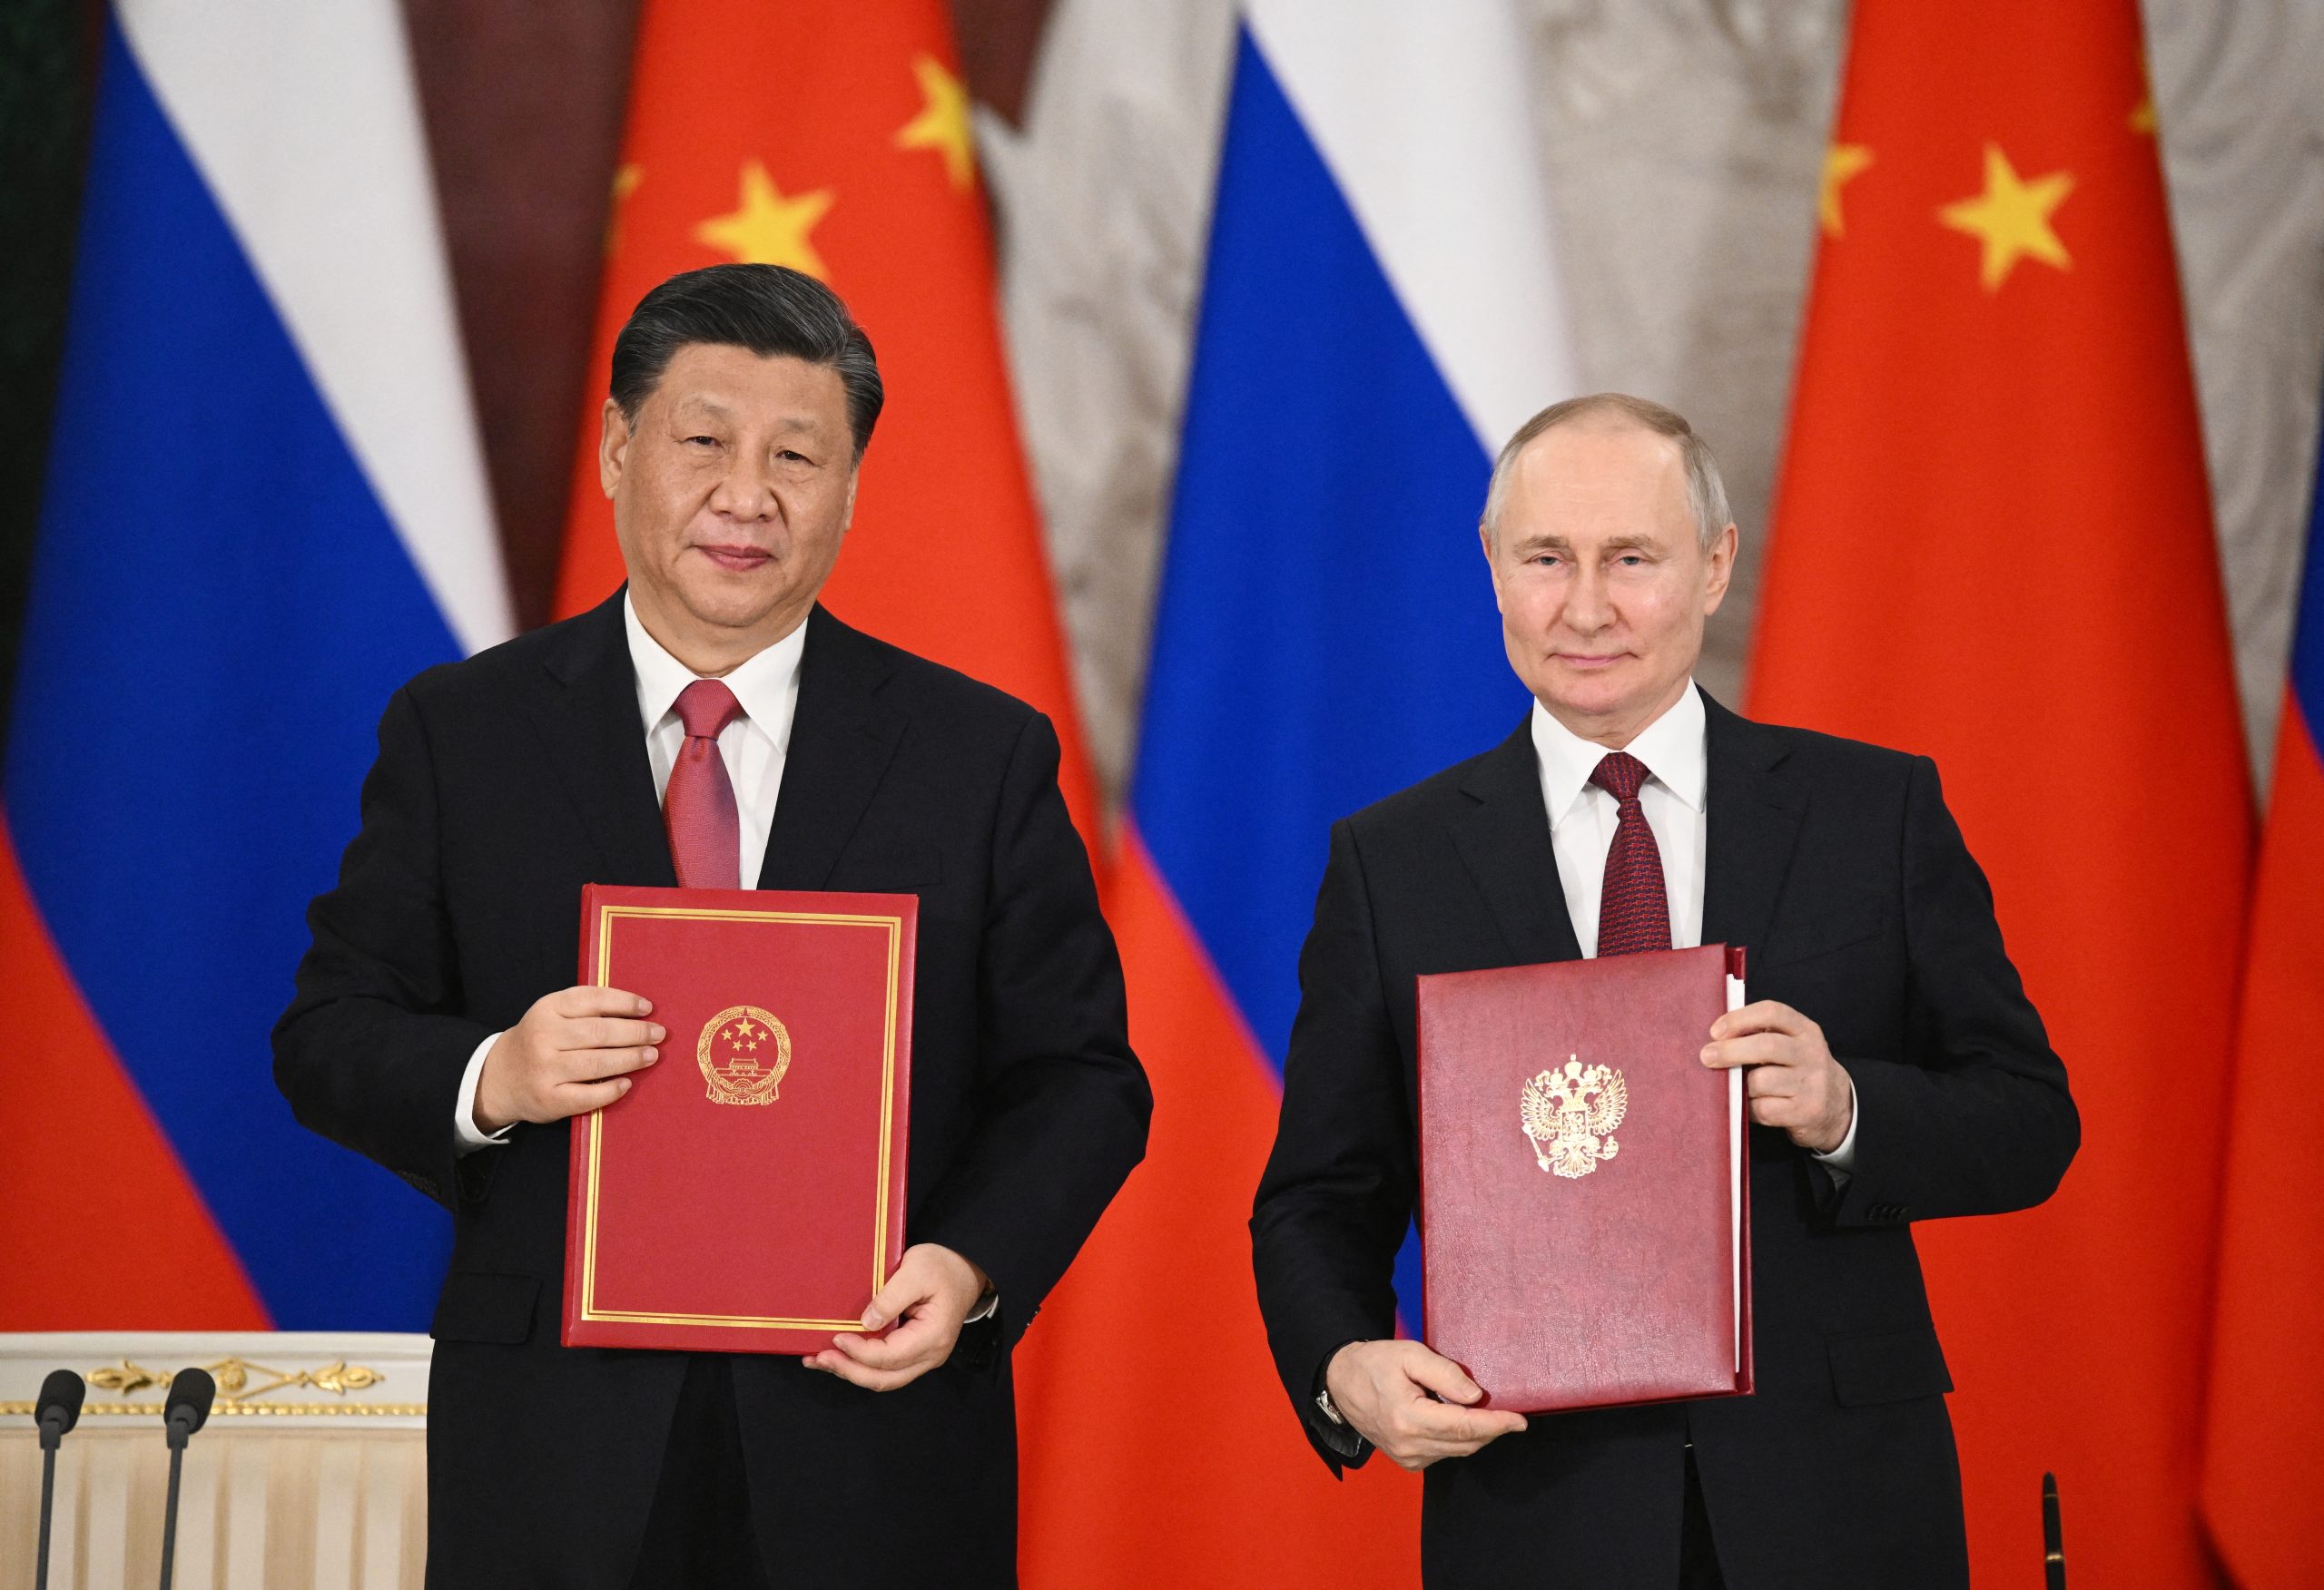 In Sub-Saharan Africa, China embraces Russian messaging against Ukraine